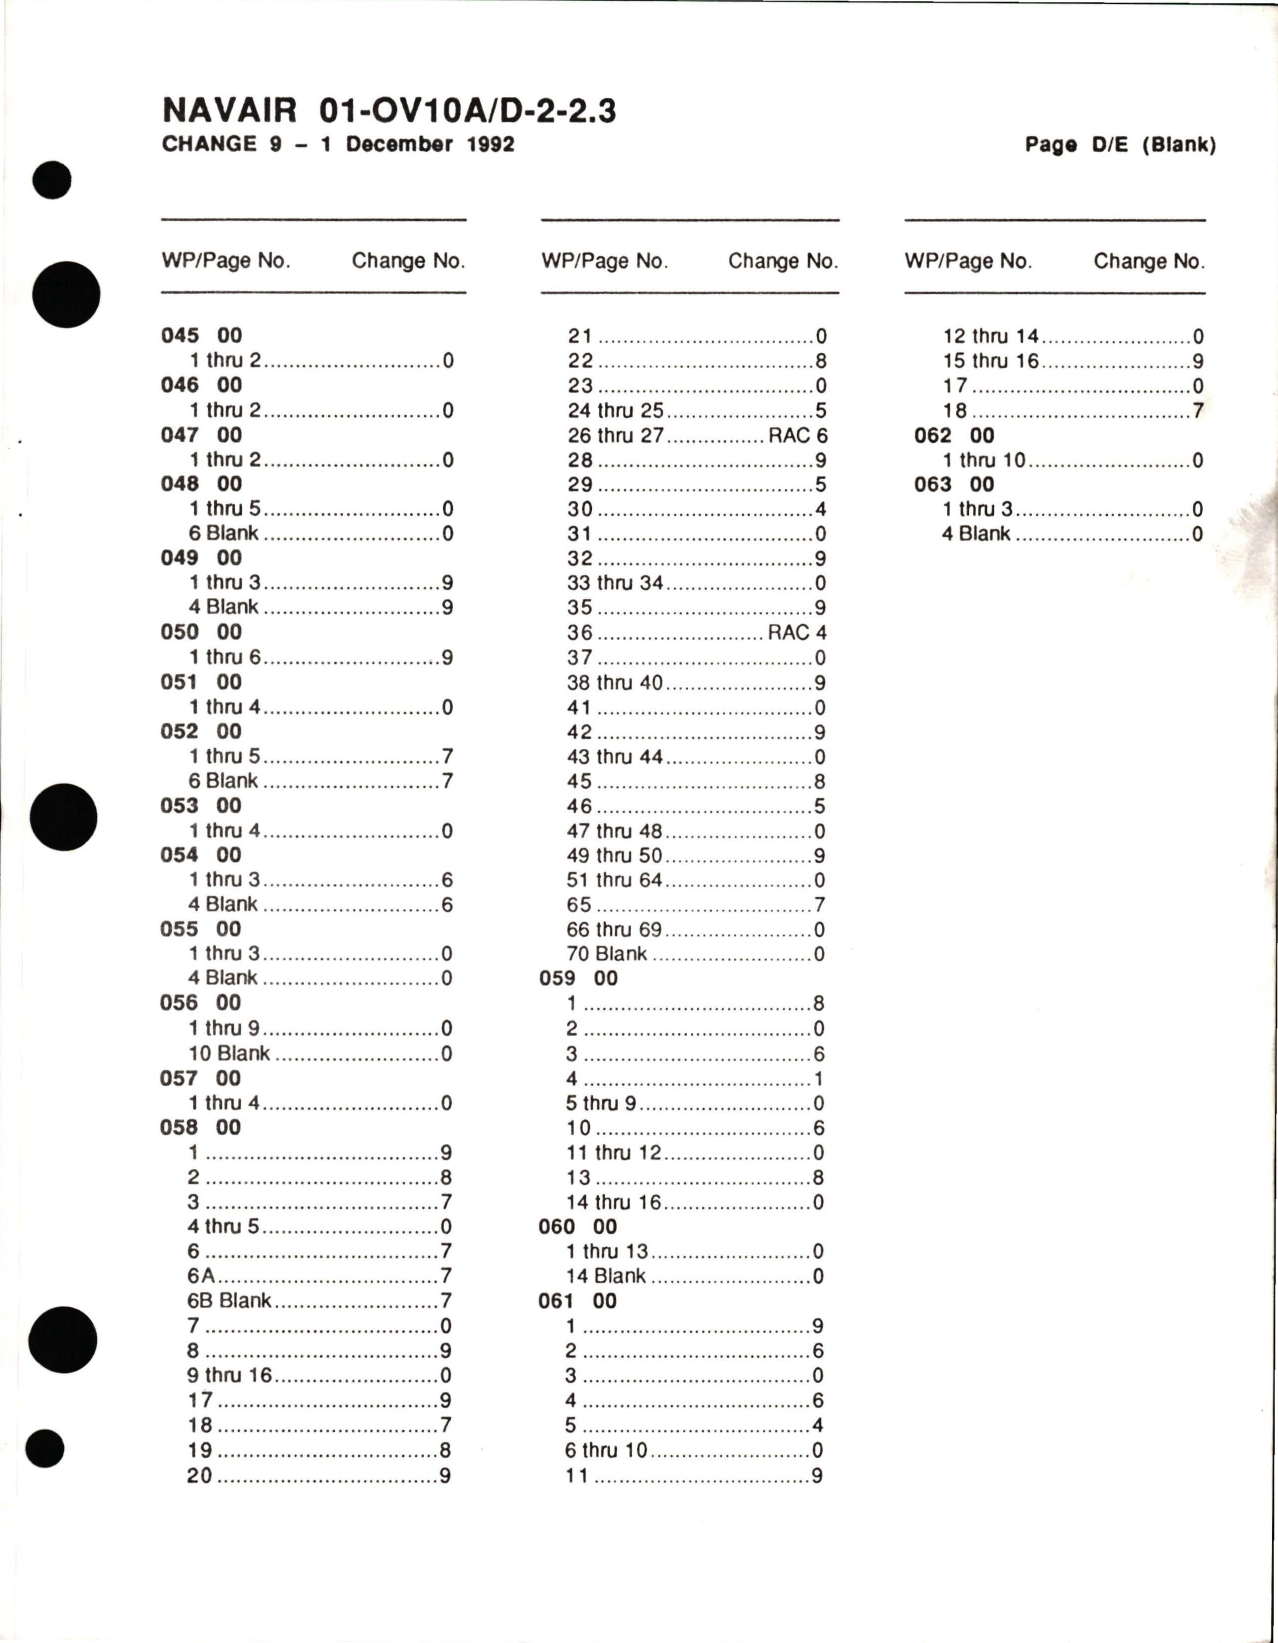 Sample page 5 from AirCorps Library document: Organizational Maintenance with Illustrated Parts Breakdown for Landing Gear and Related Systems for OV-10A/D